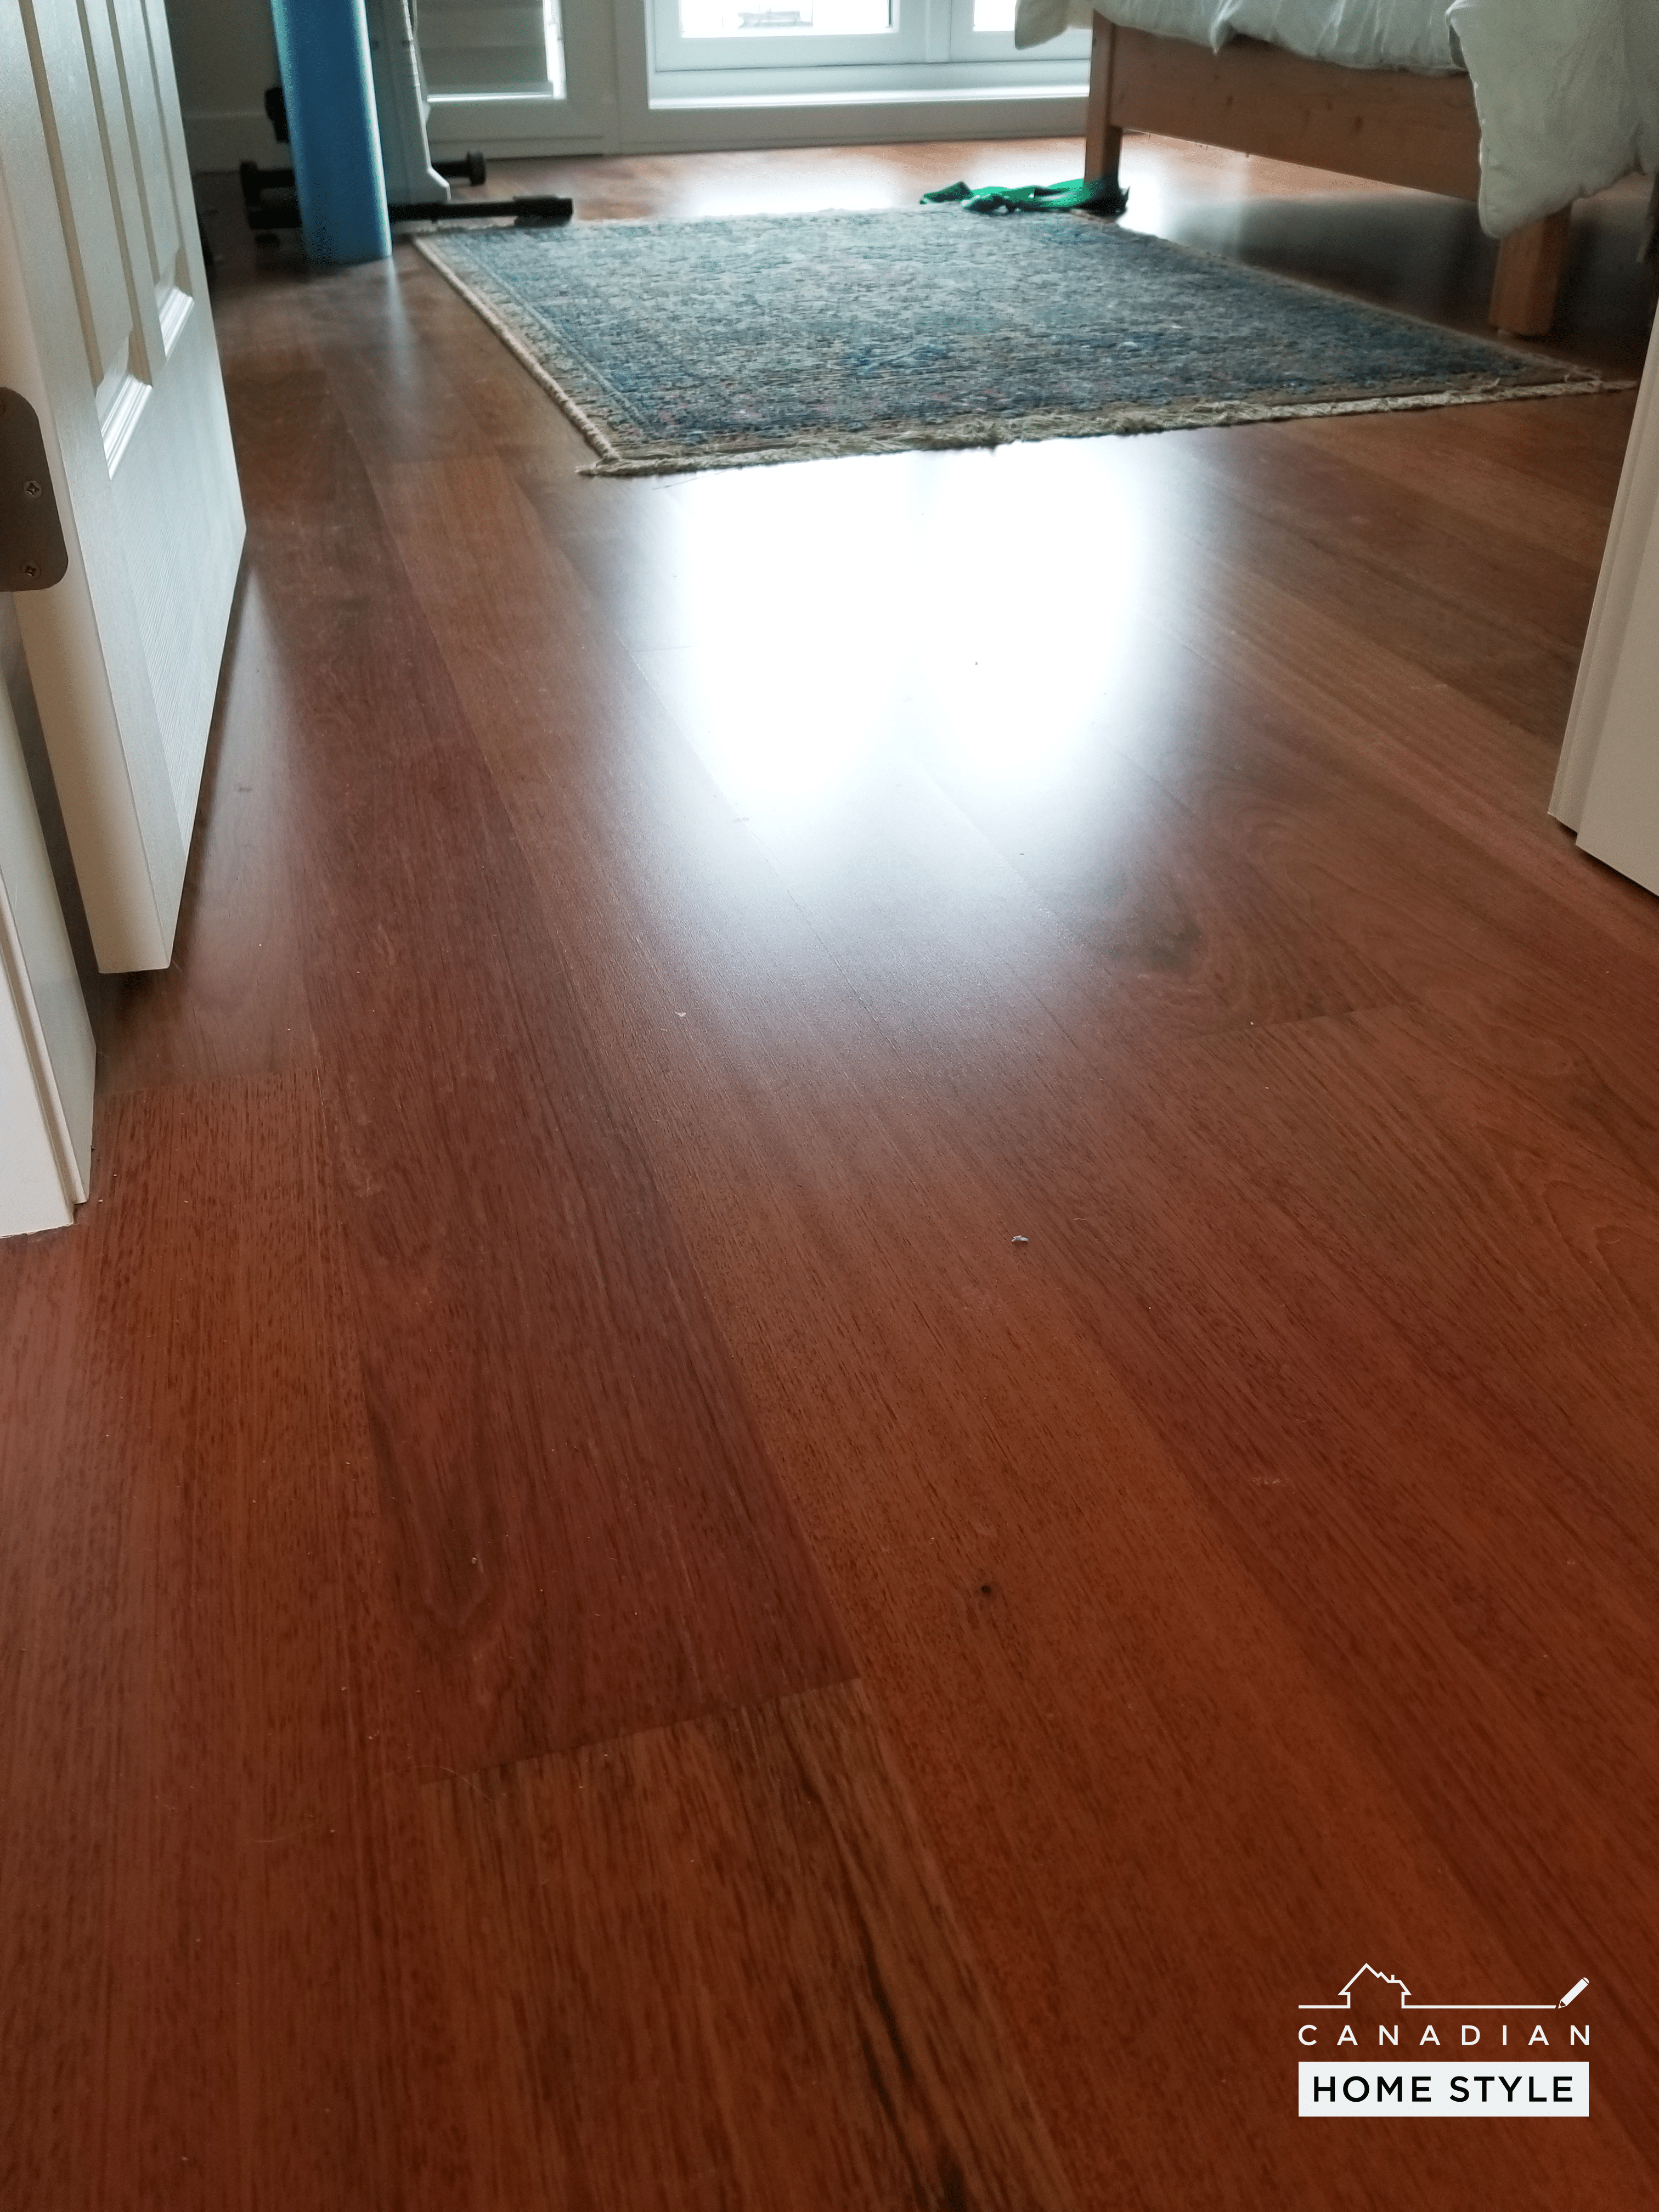 Affordable luxury with Vancouver wood flooring